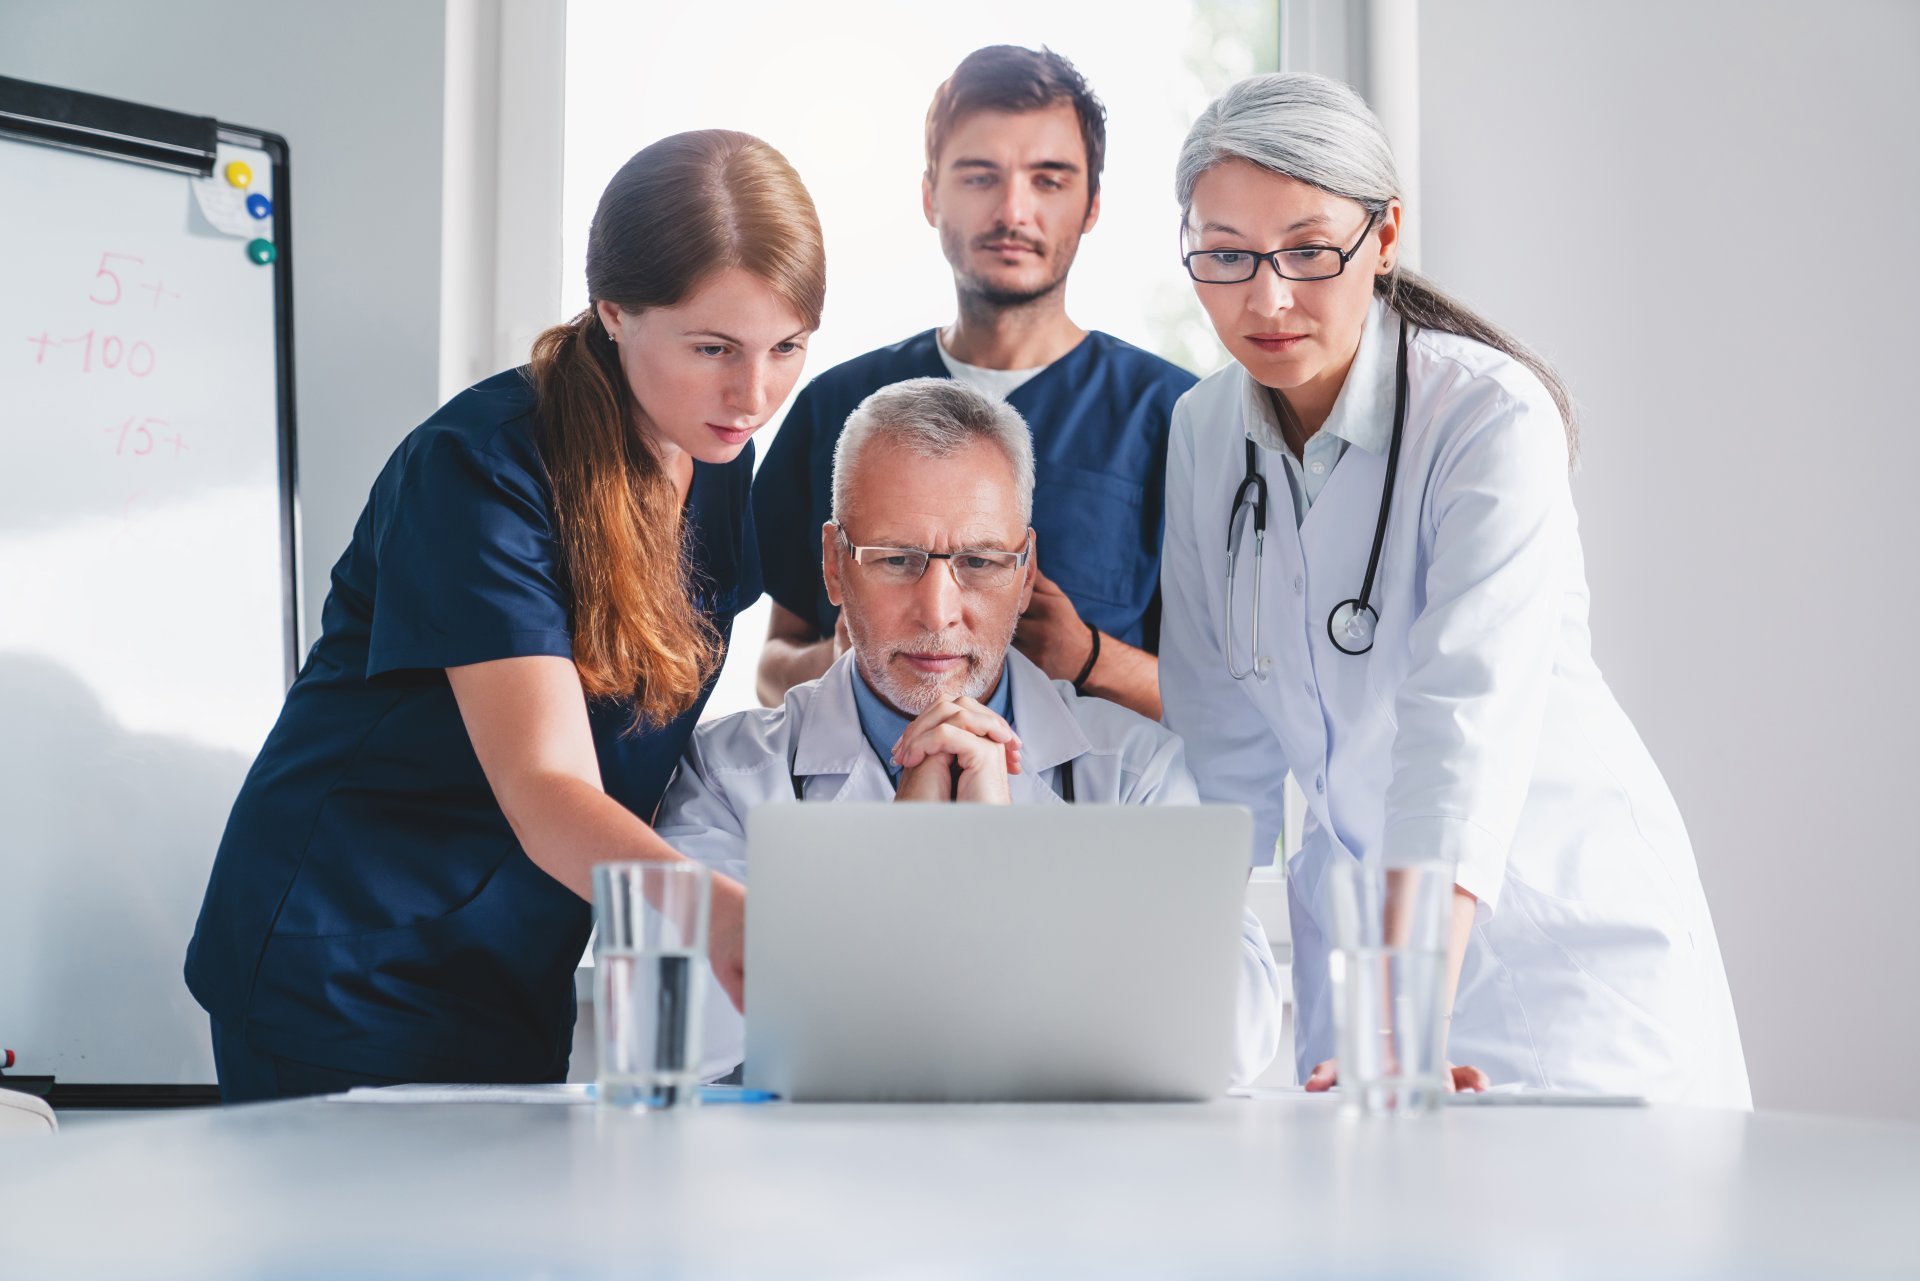 A group of doctors and nurses gather around a laptop.